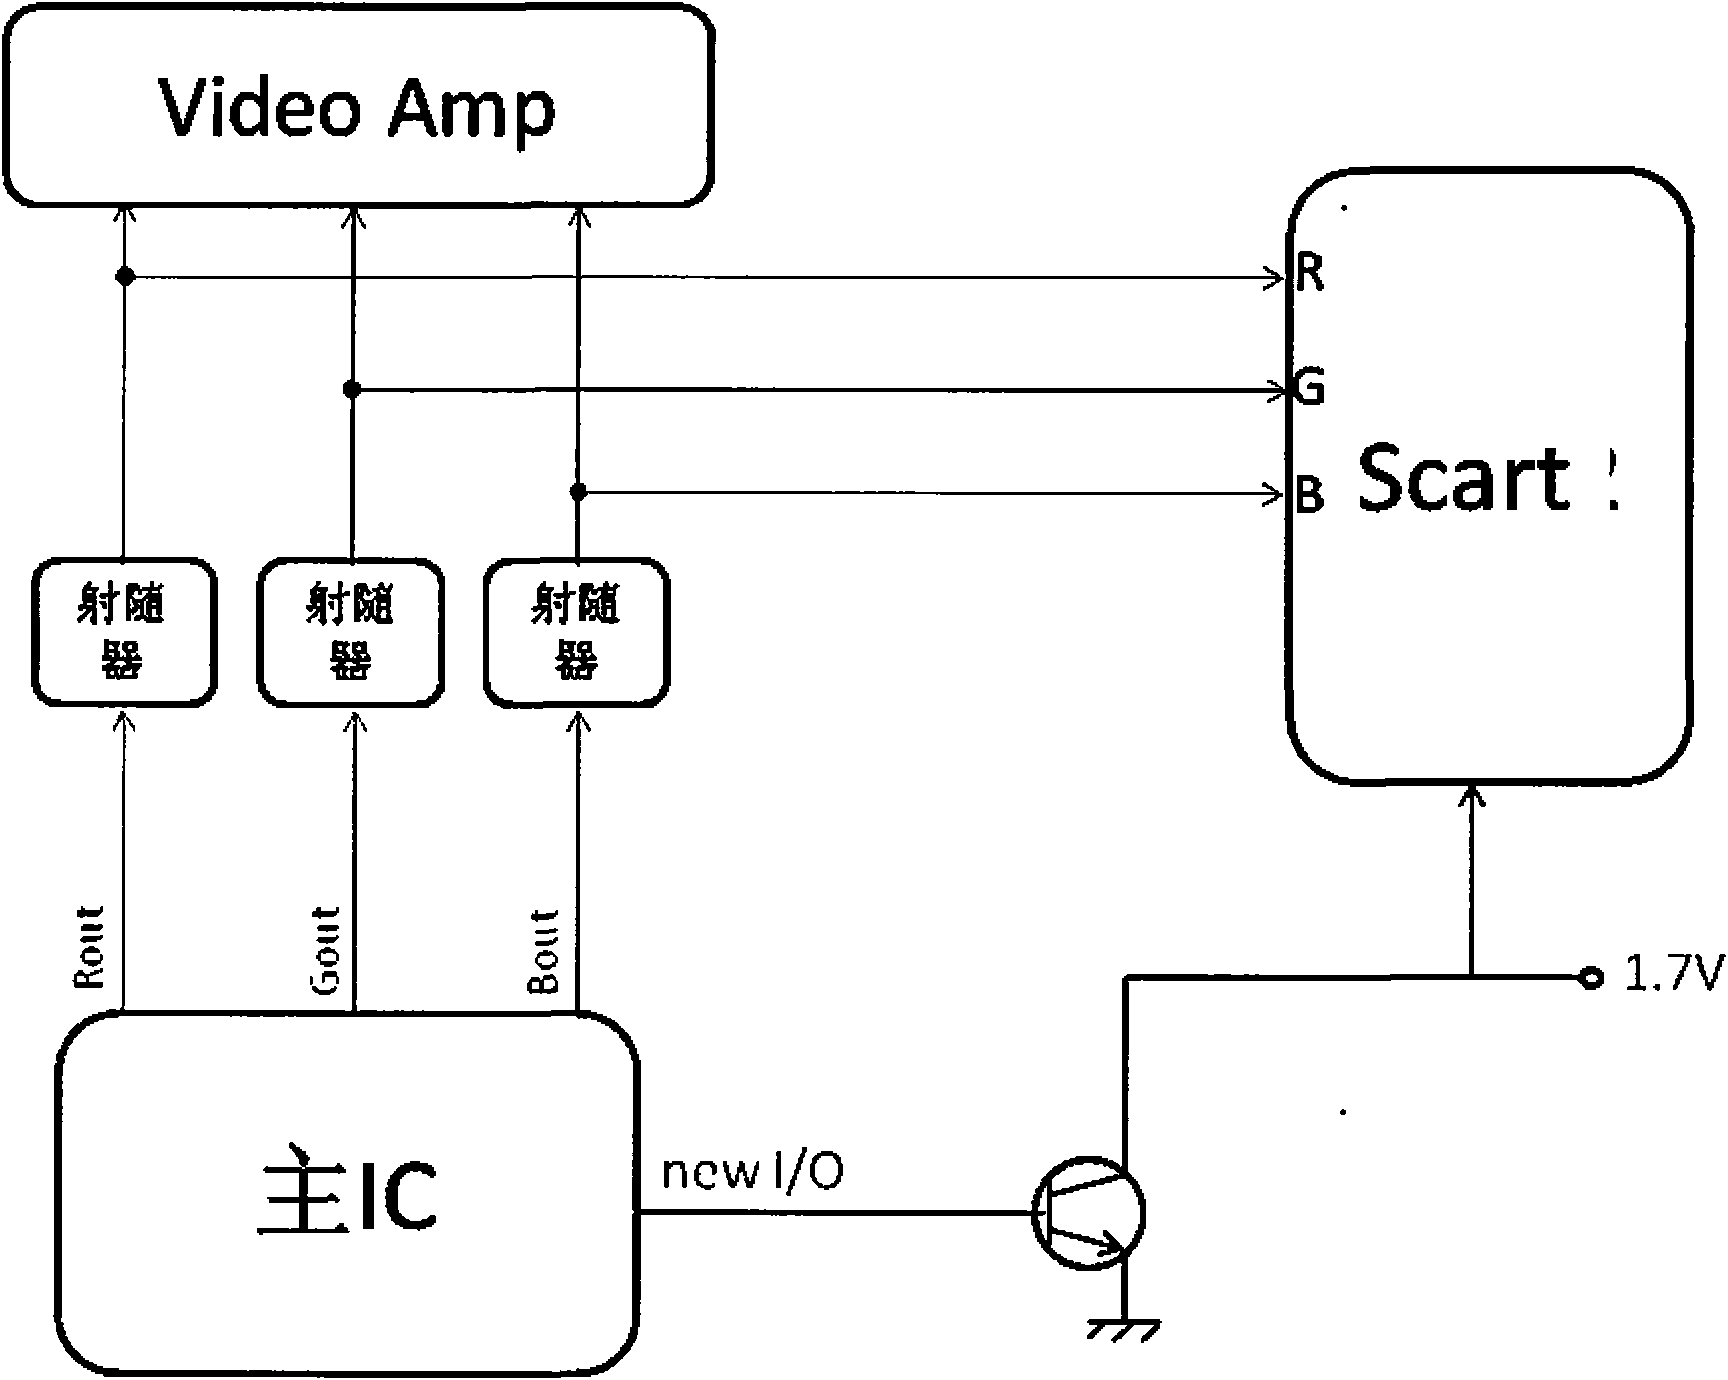 Television with two video output formats